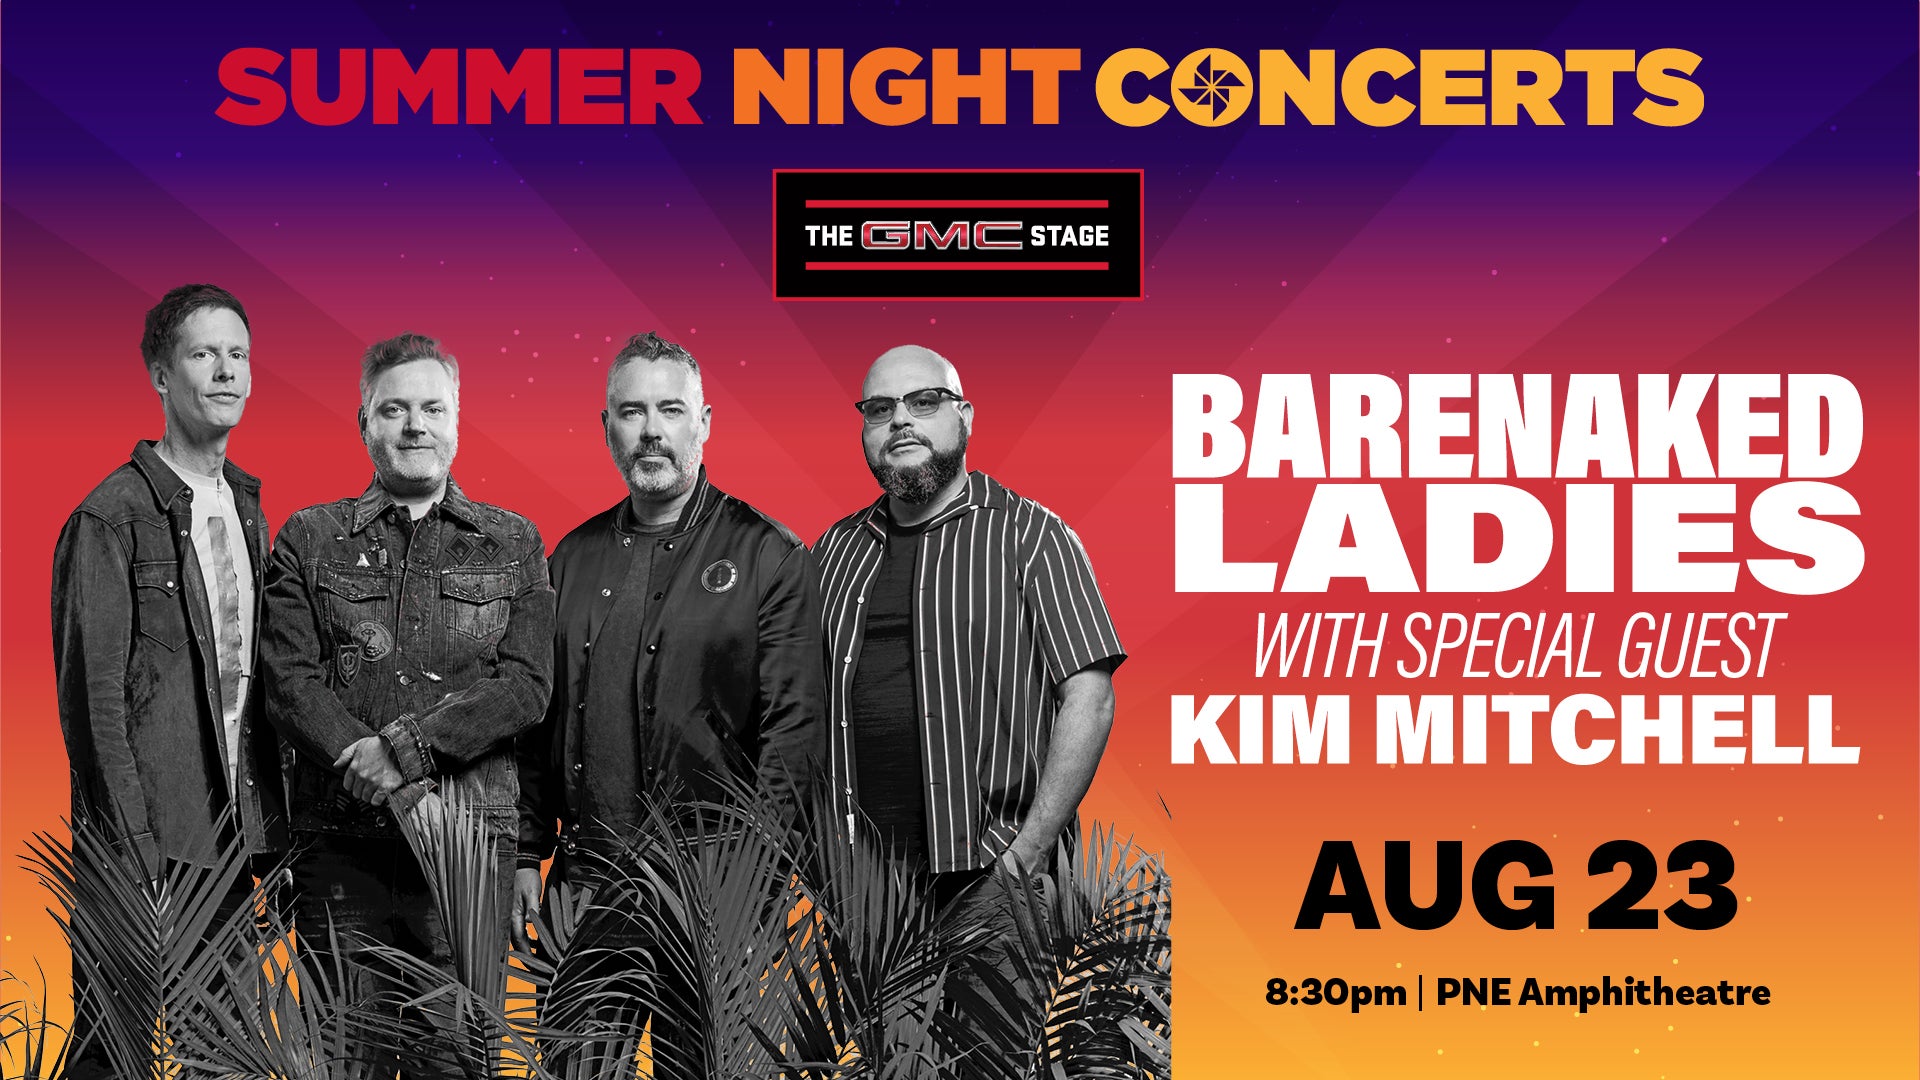 Barenaked Ladies with Special Guest Kim Mitchell